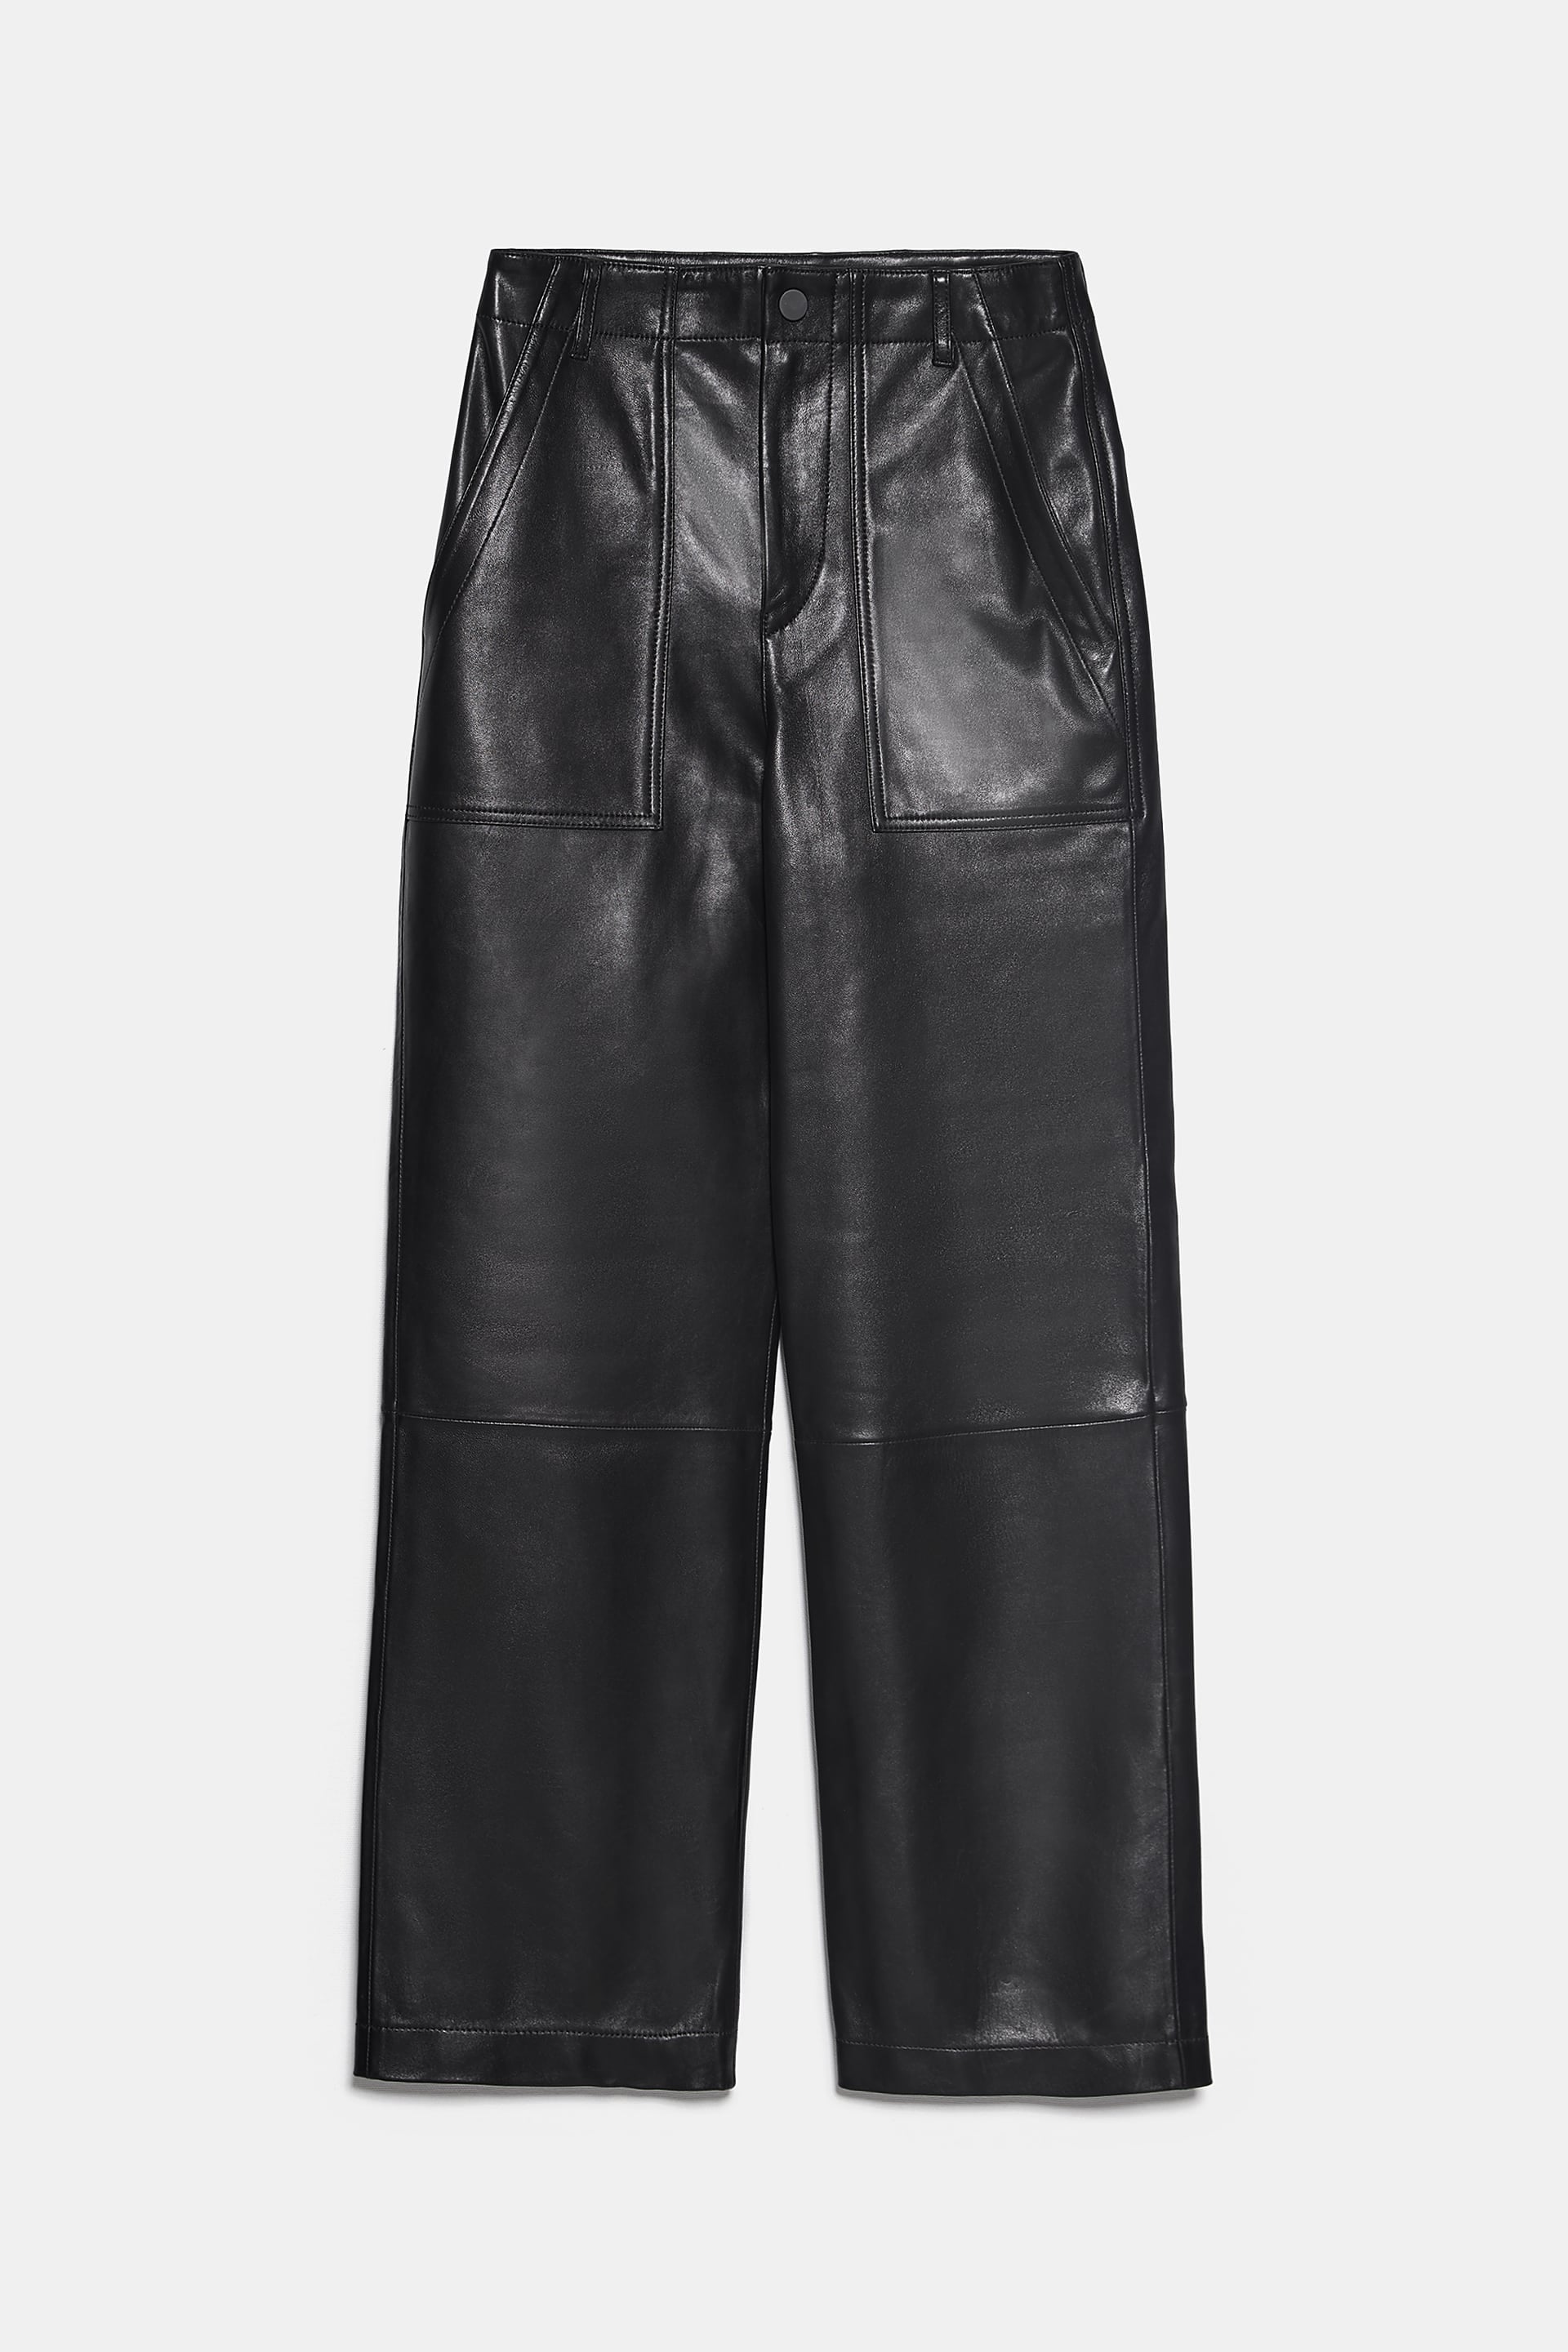 Zara Leather Pants, Monochrome Outfits Are Always a Good Idea, but They're  Really Having a Moment